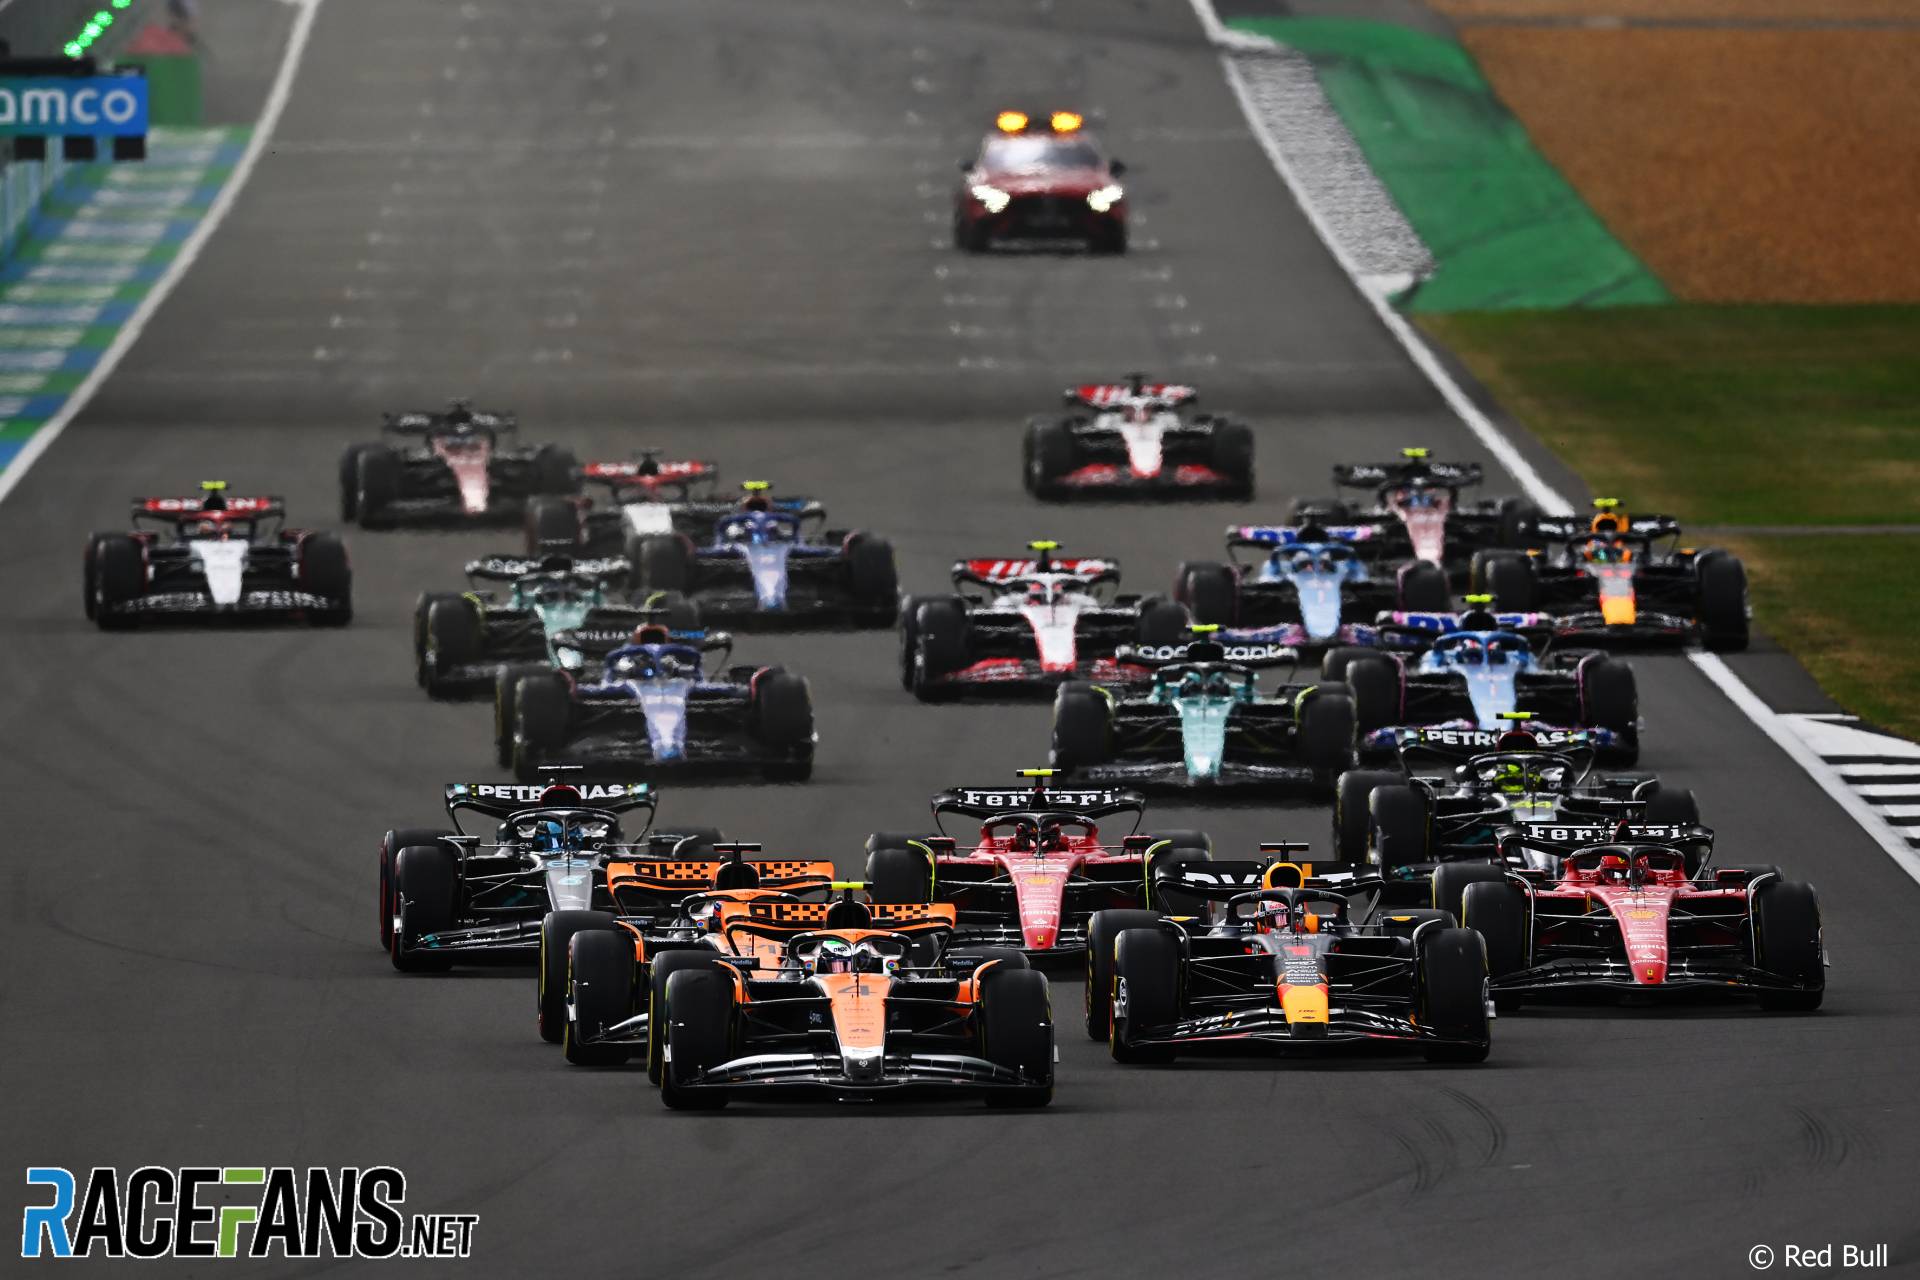 The 2023 British Grand Prix was held at Silverstone and won by Max Verstappen